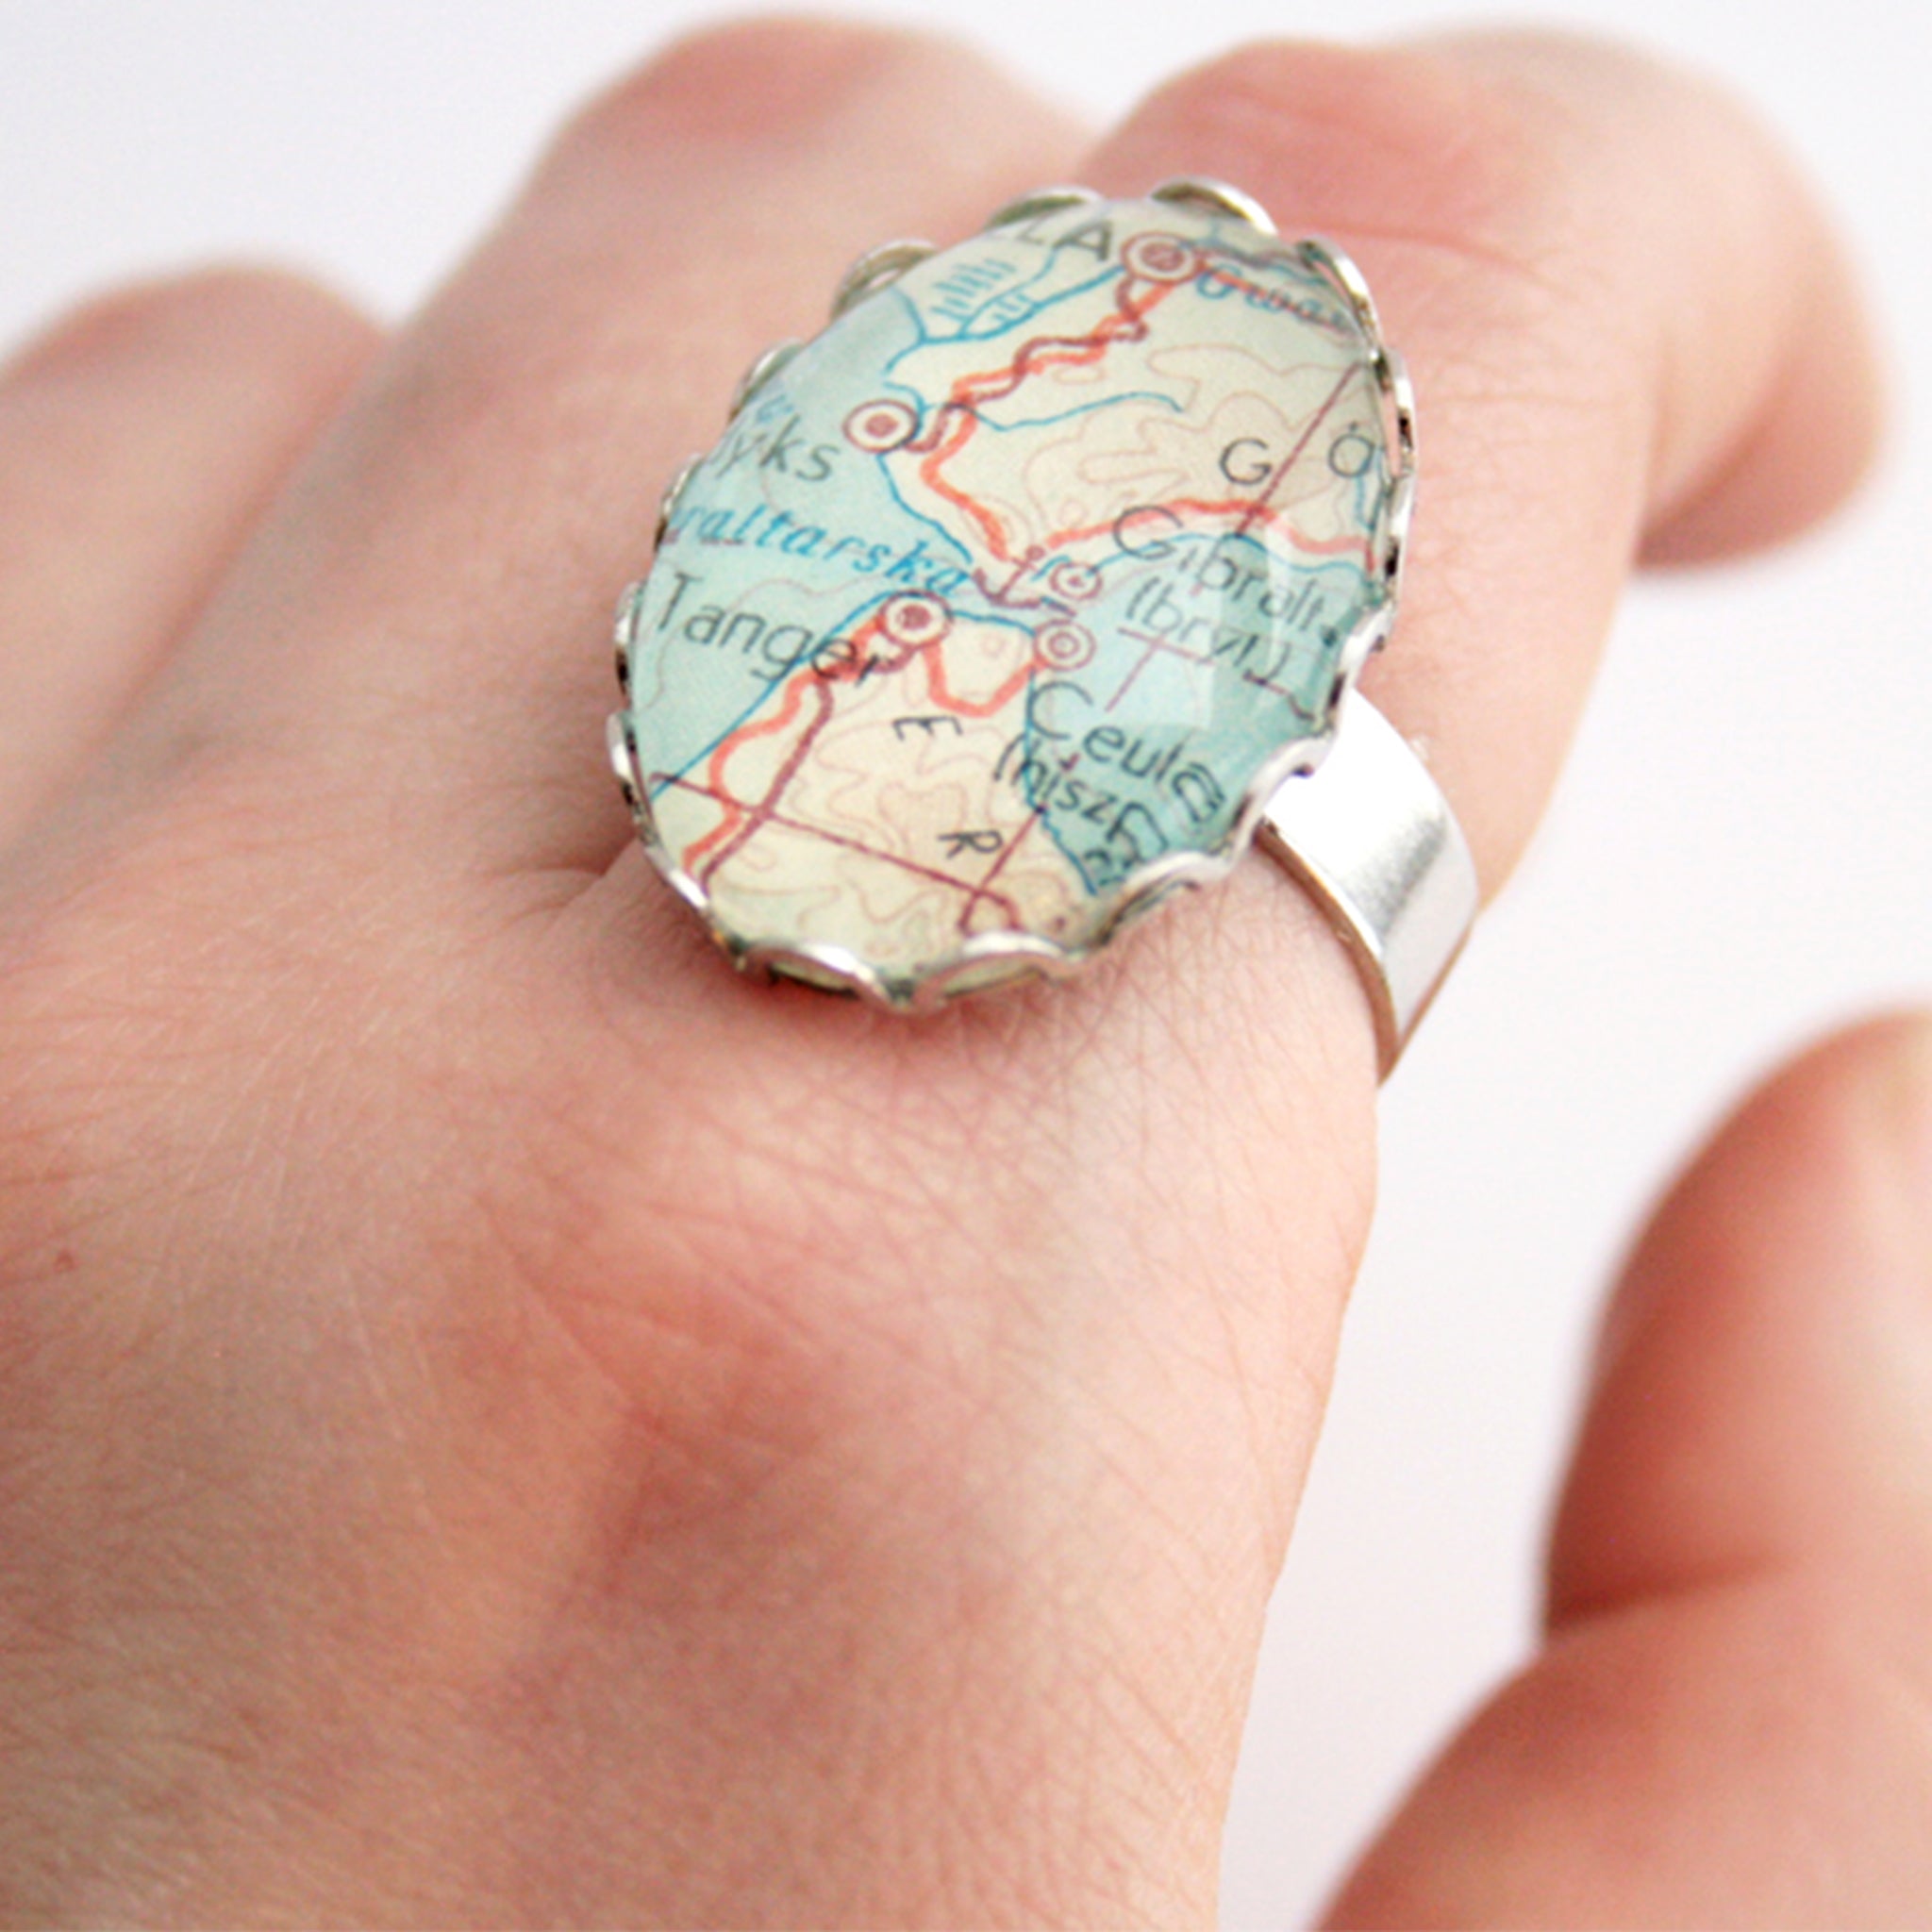 Oval silver ring personalised featuring map of Gibraltar worn on finger